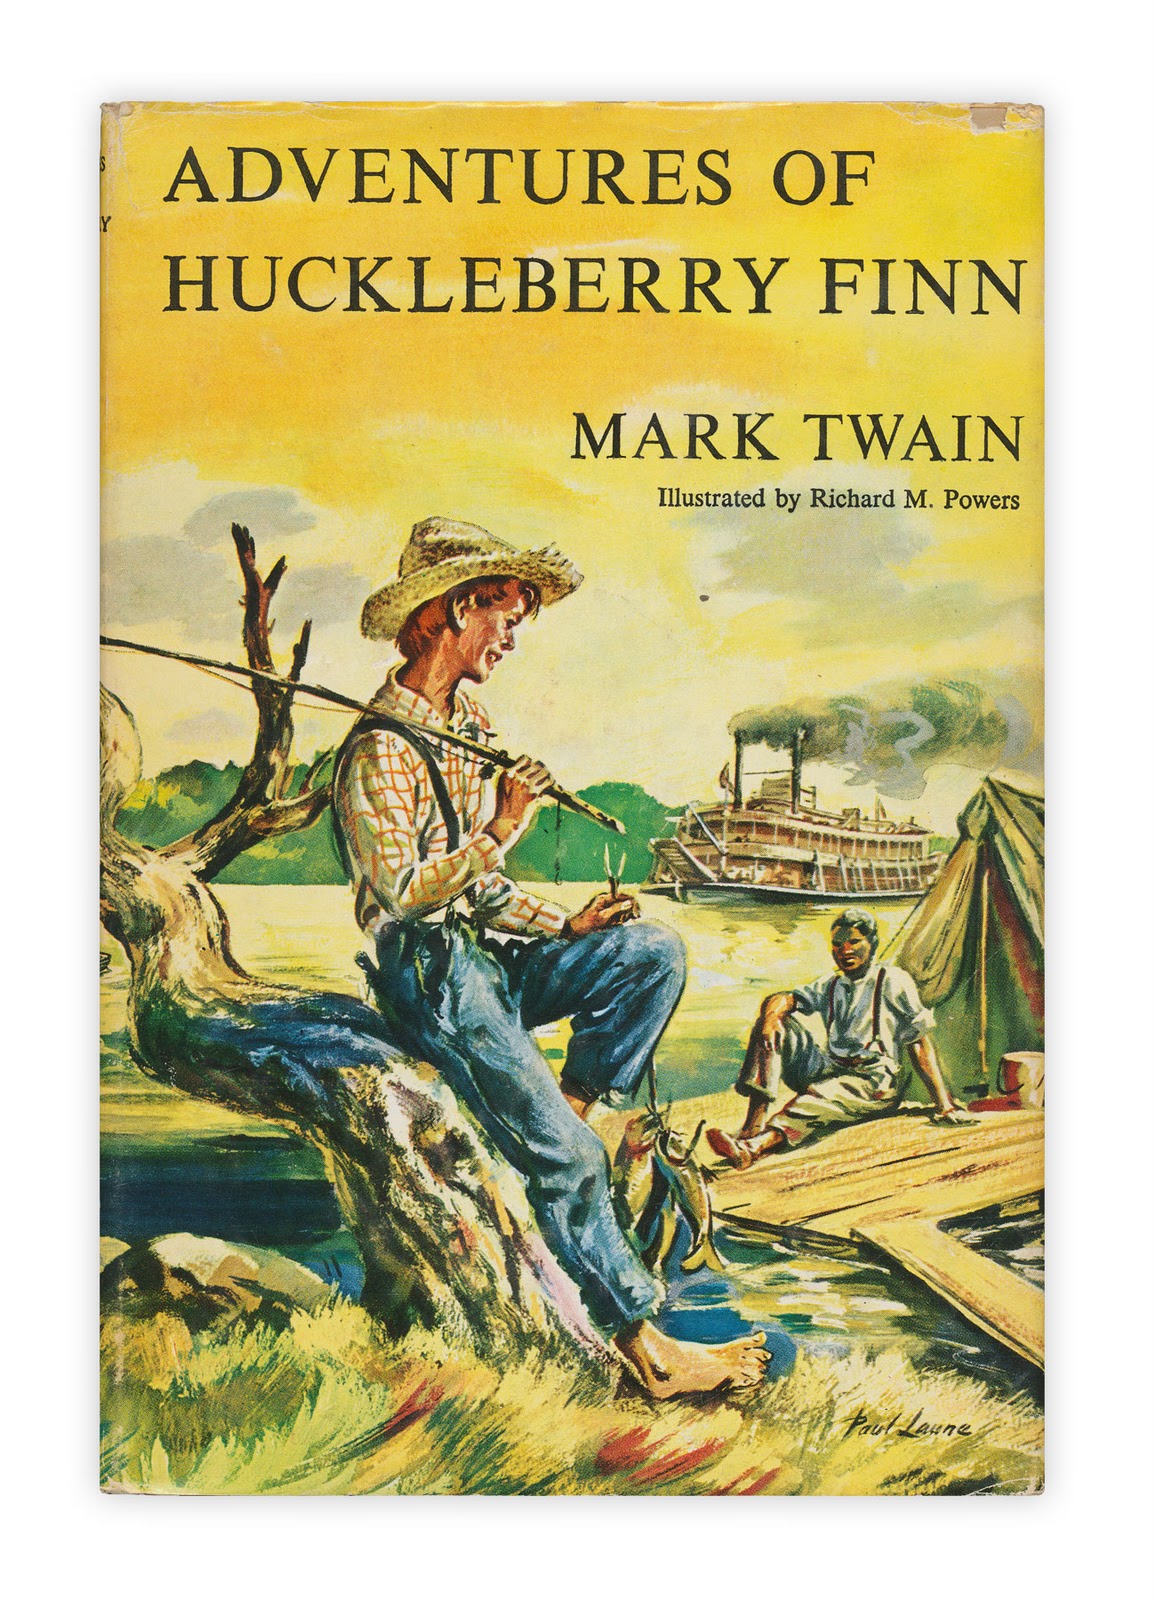 The Adventures of Huckleberry Finn Characters